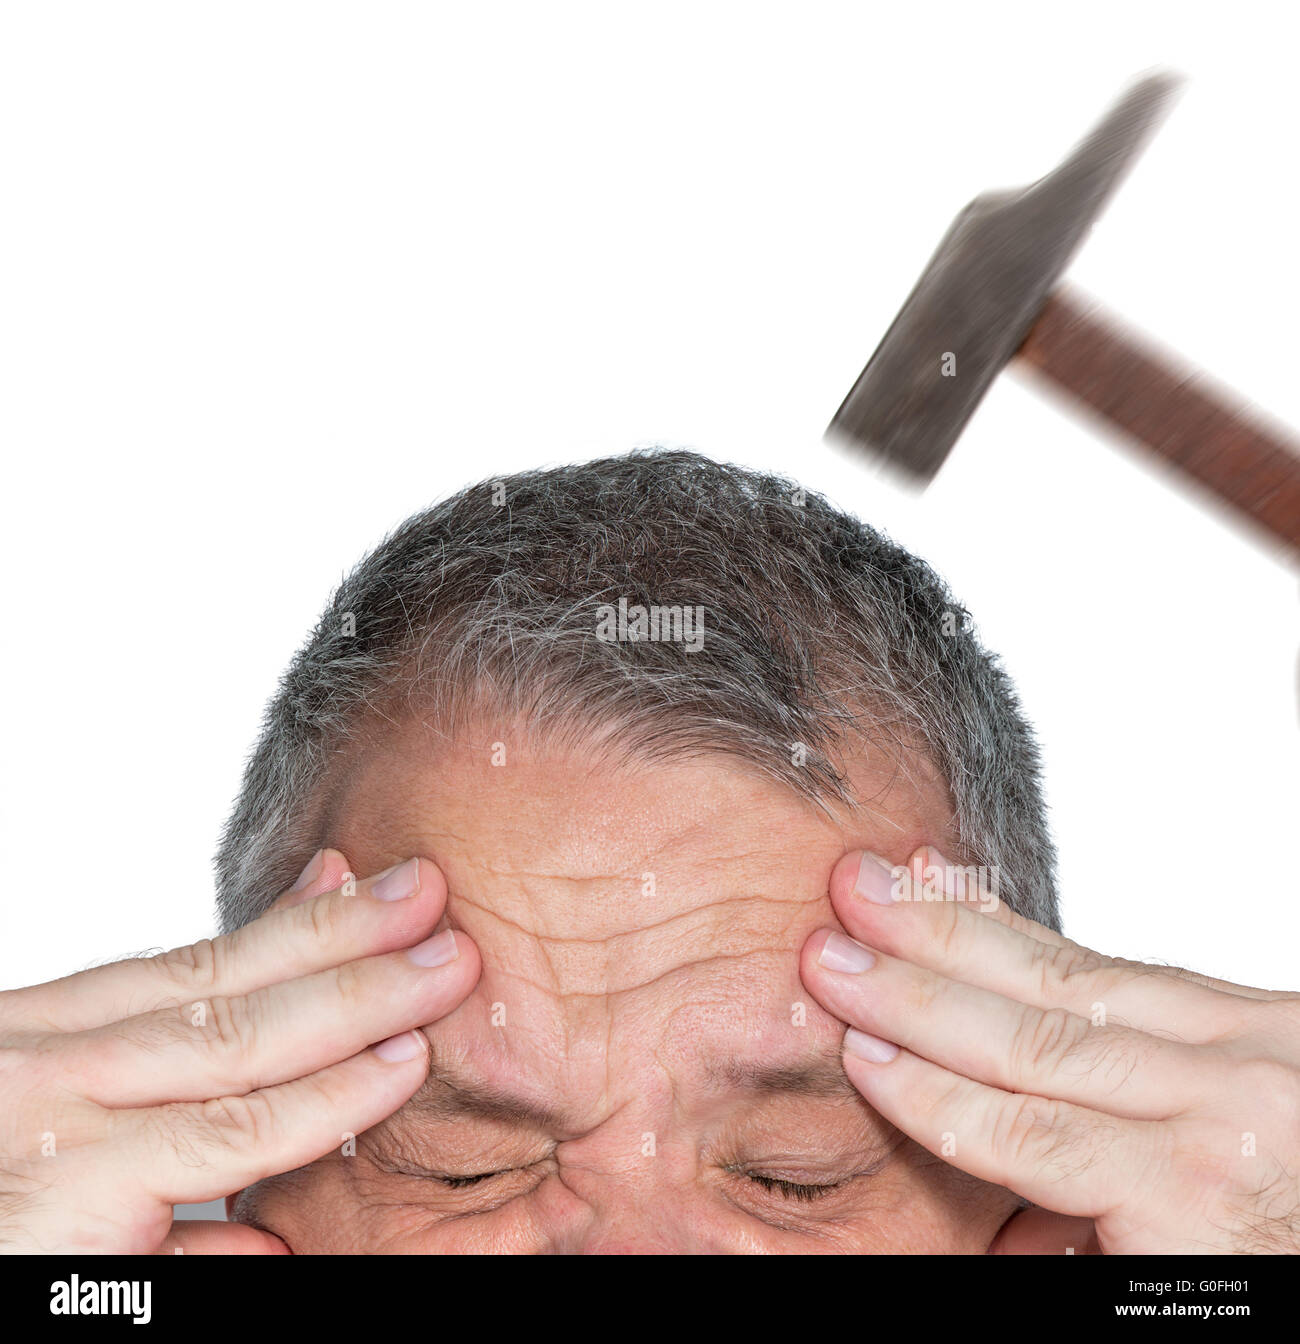 Man with hands on his forehead Stock Photo